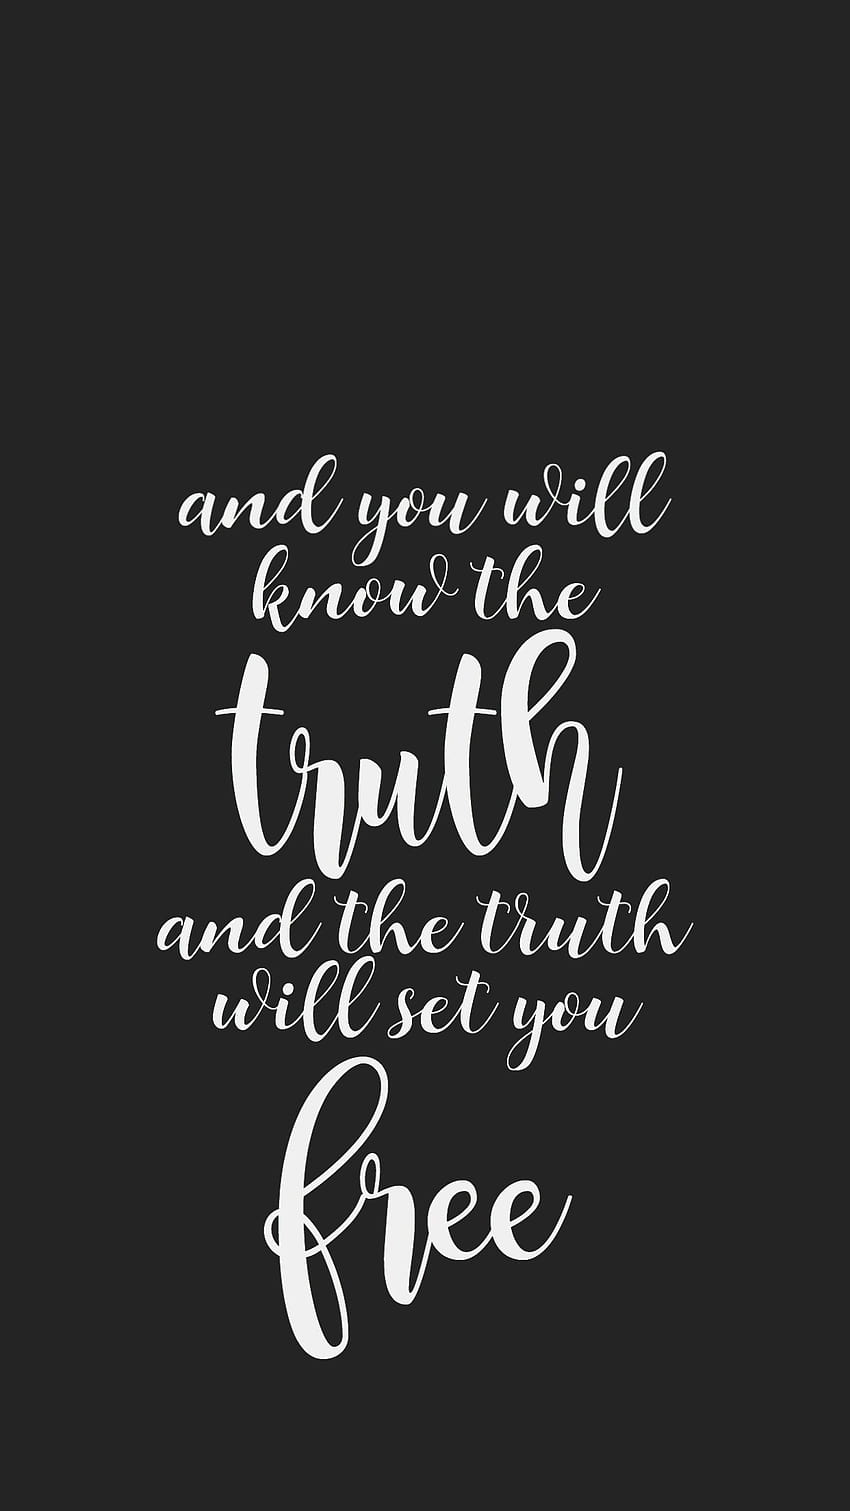 1366x768px, 720P Free download | The Truth Will Set You Quote Love God ...